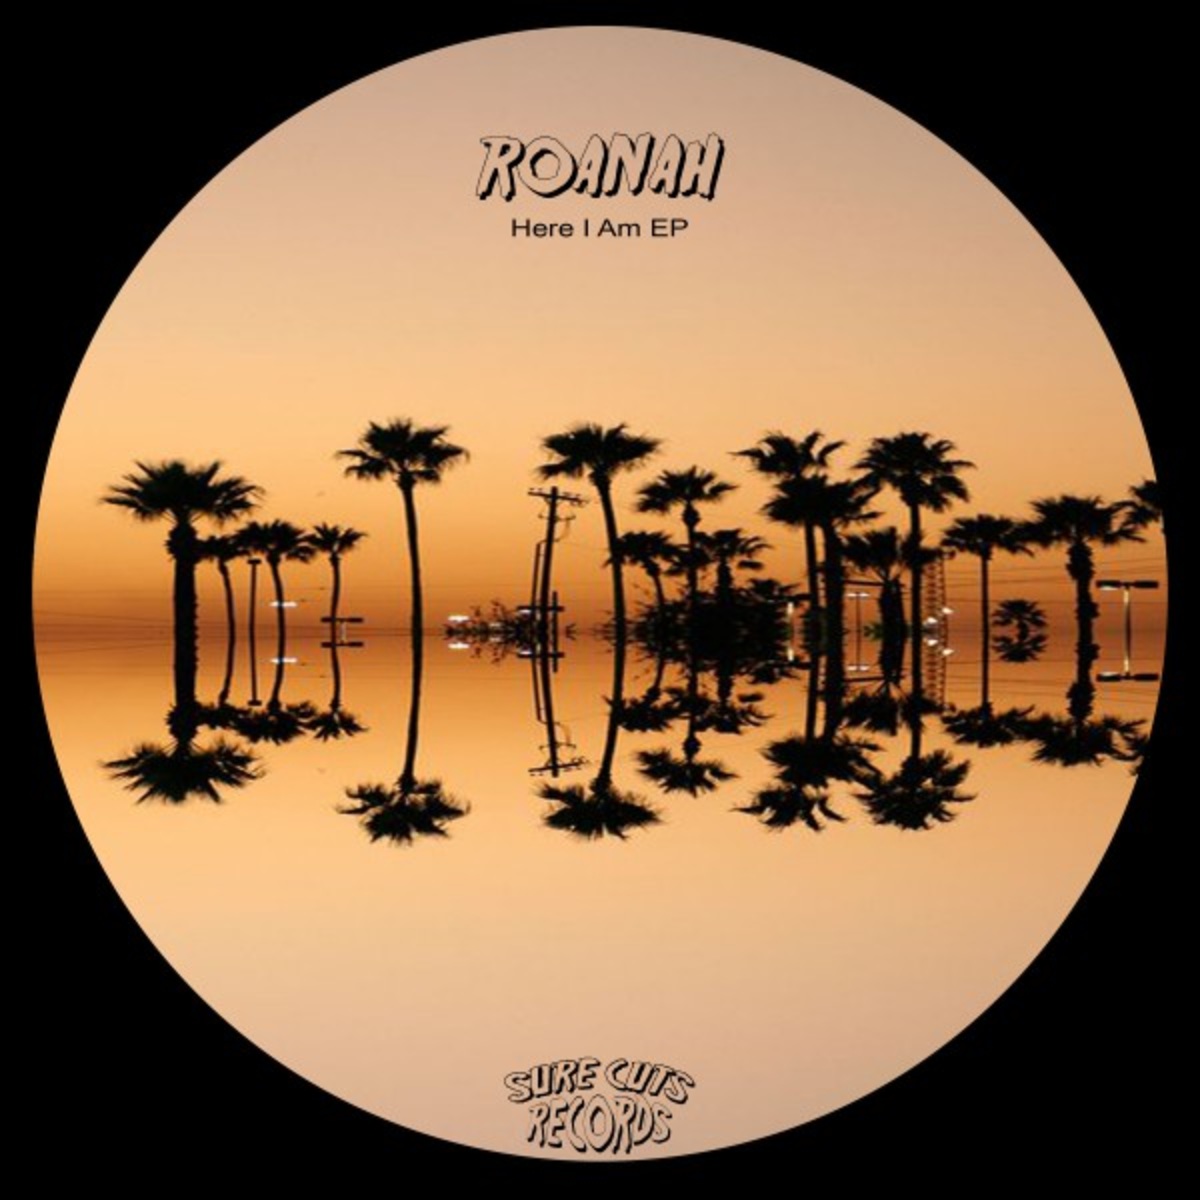 Roanah - Here I Am EP / Sure Cuts Records